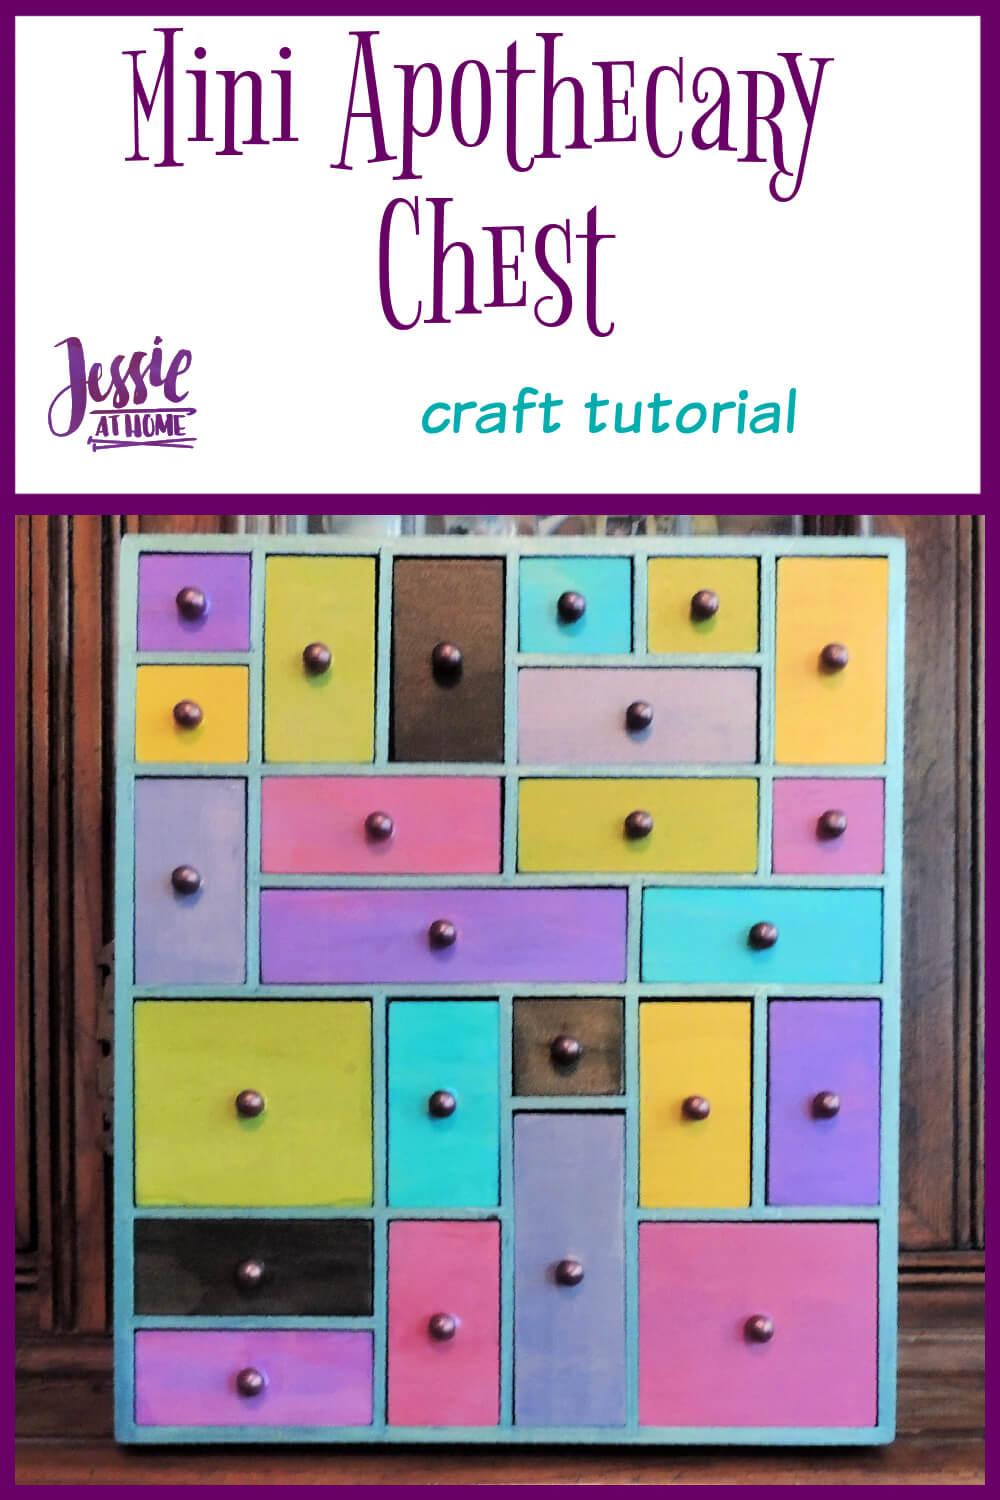 Mini Apothecary Chest - craft tutorial by Jessie At Home - Pin 1